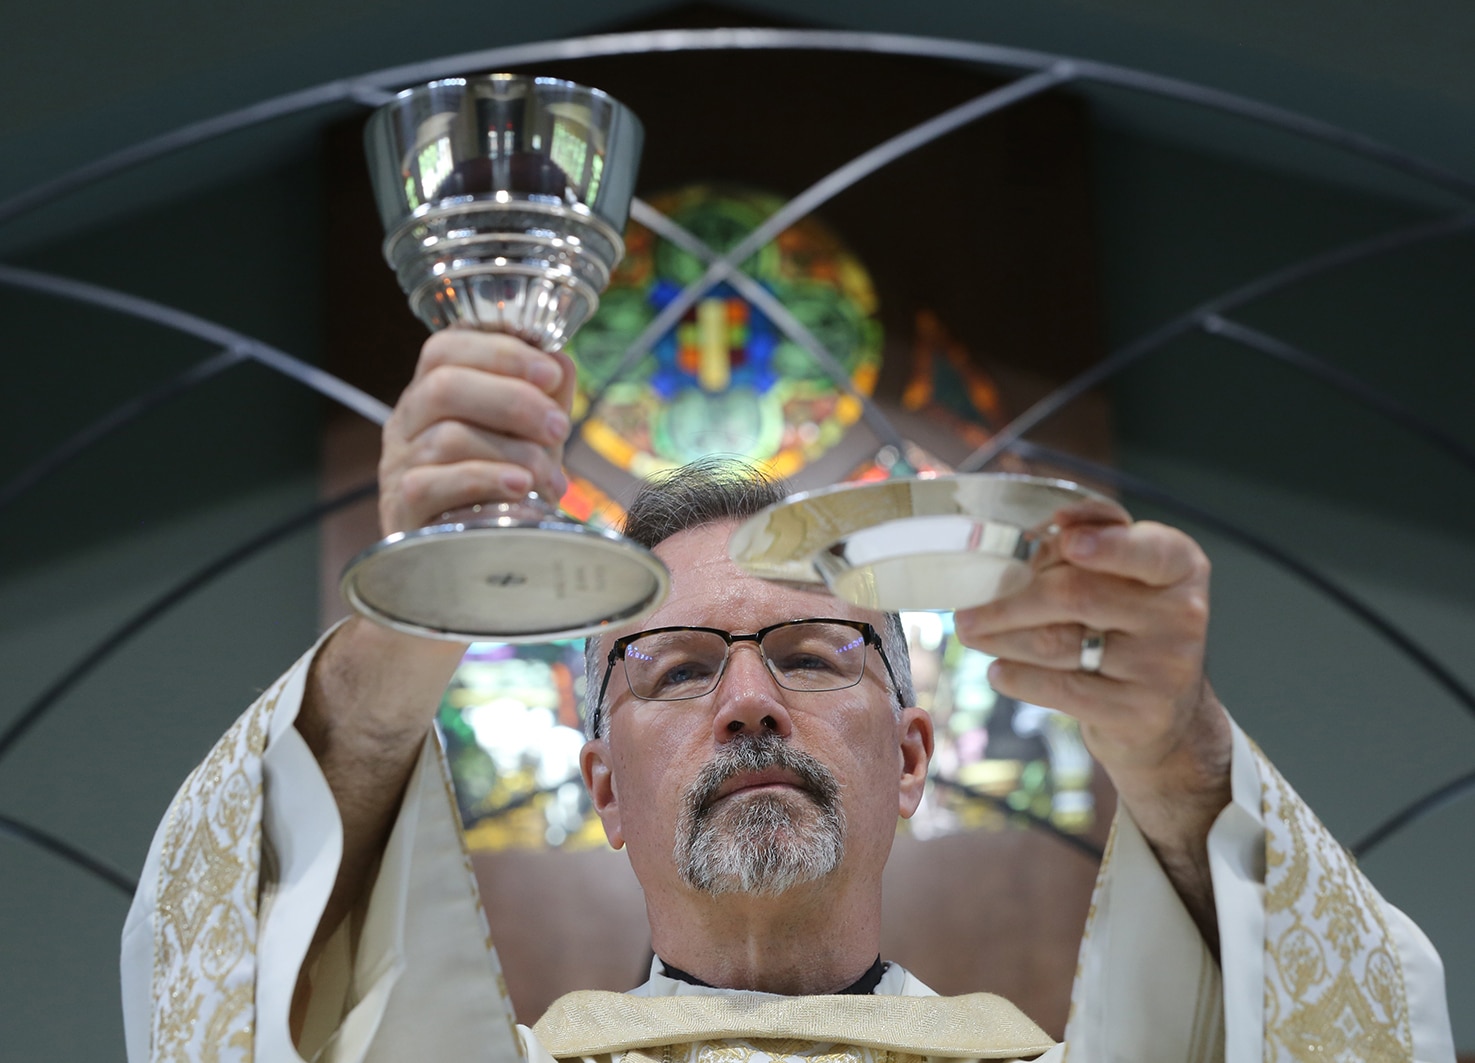 The Eucharist is the cure for our loneliness